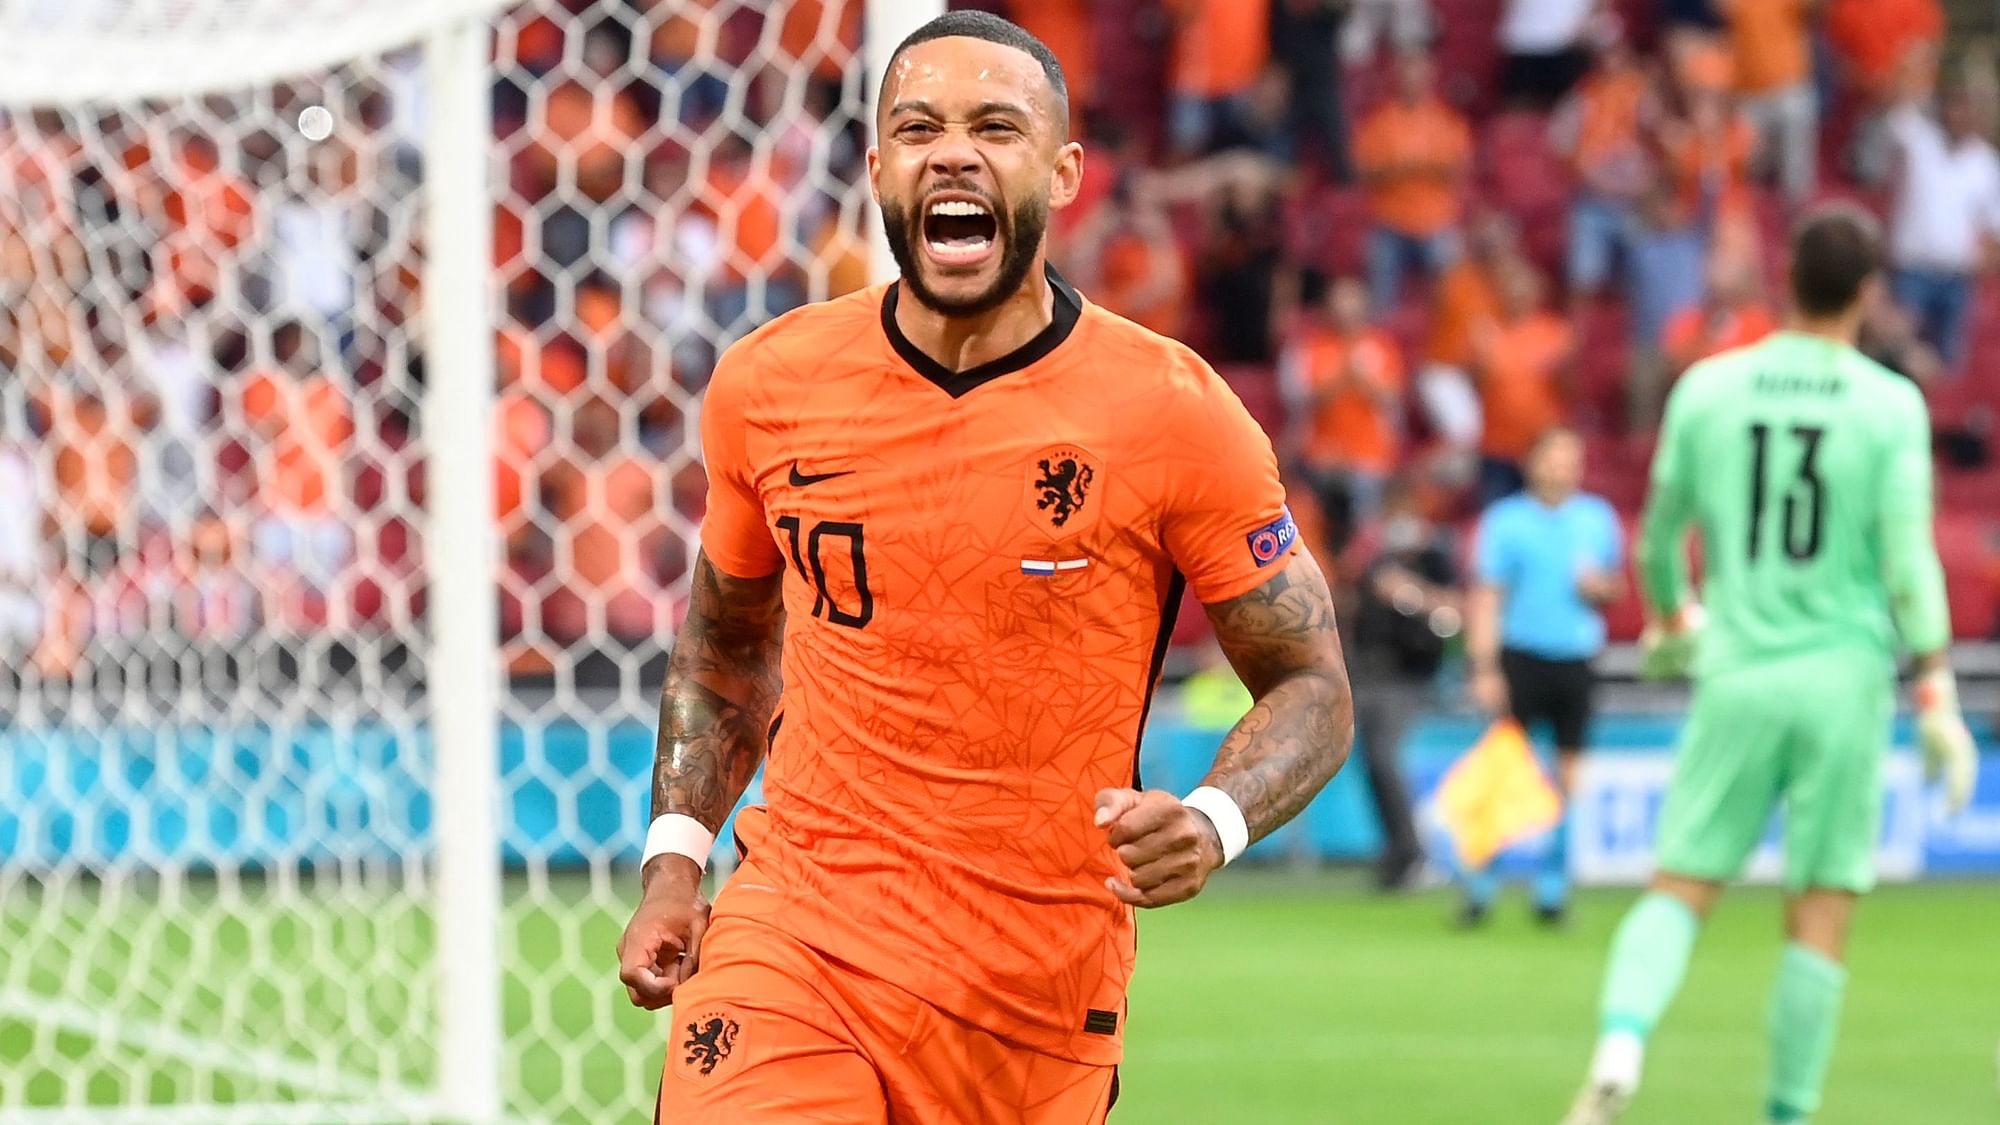 Memphis Depay was one of the scorers for Netherlands against Austria in Euro 2020.